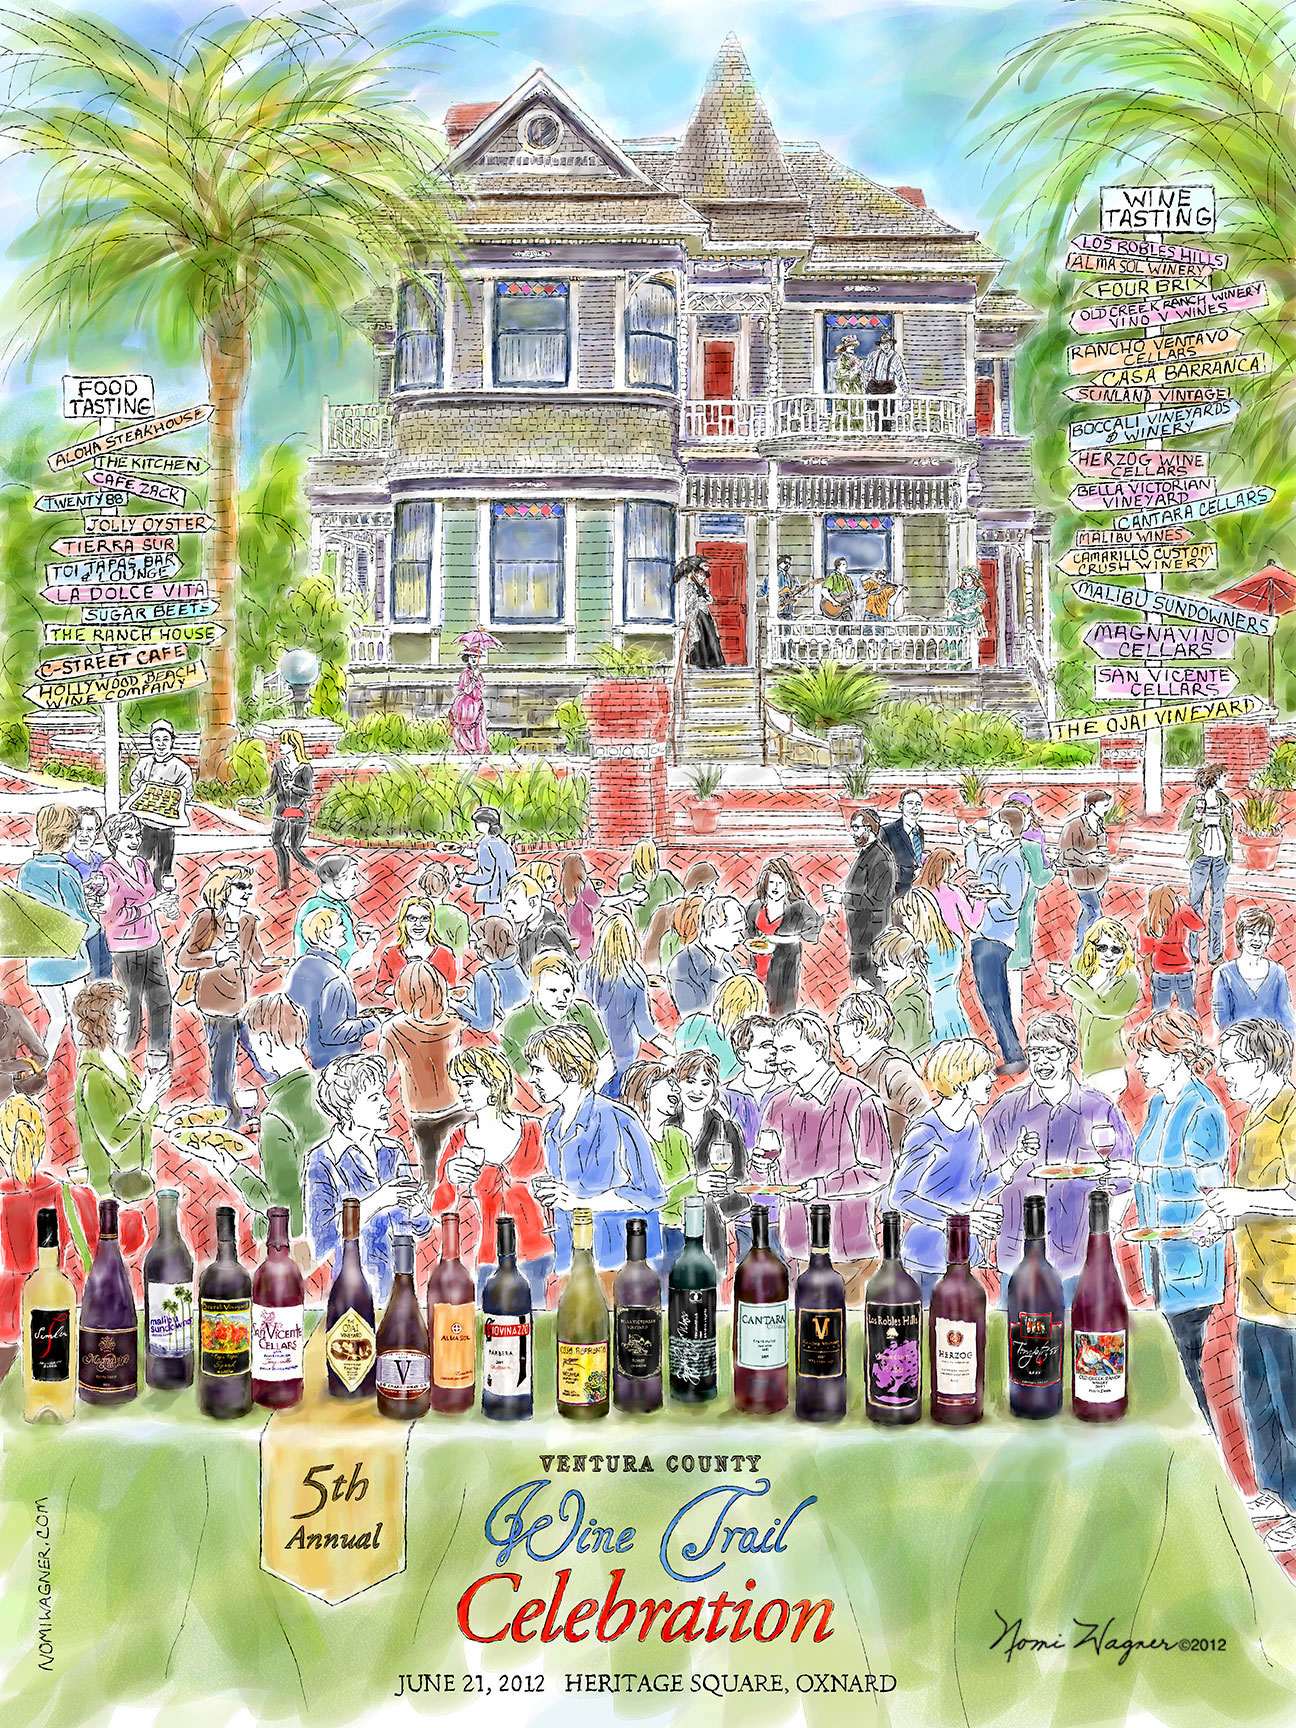 Poster by artist, Nomi Wagner, of Ventura Wine Trail Celebration at Heritage Square in Oxnard, CA.